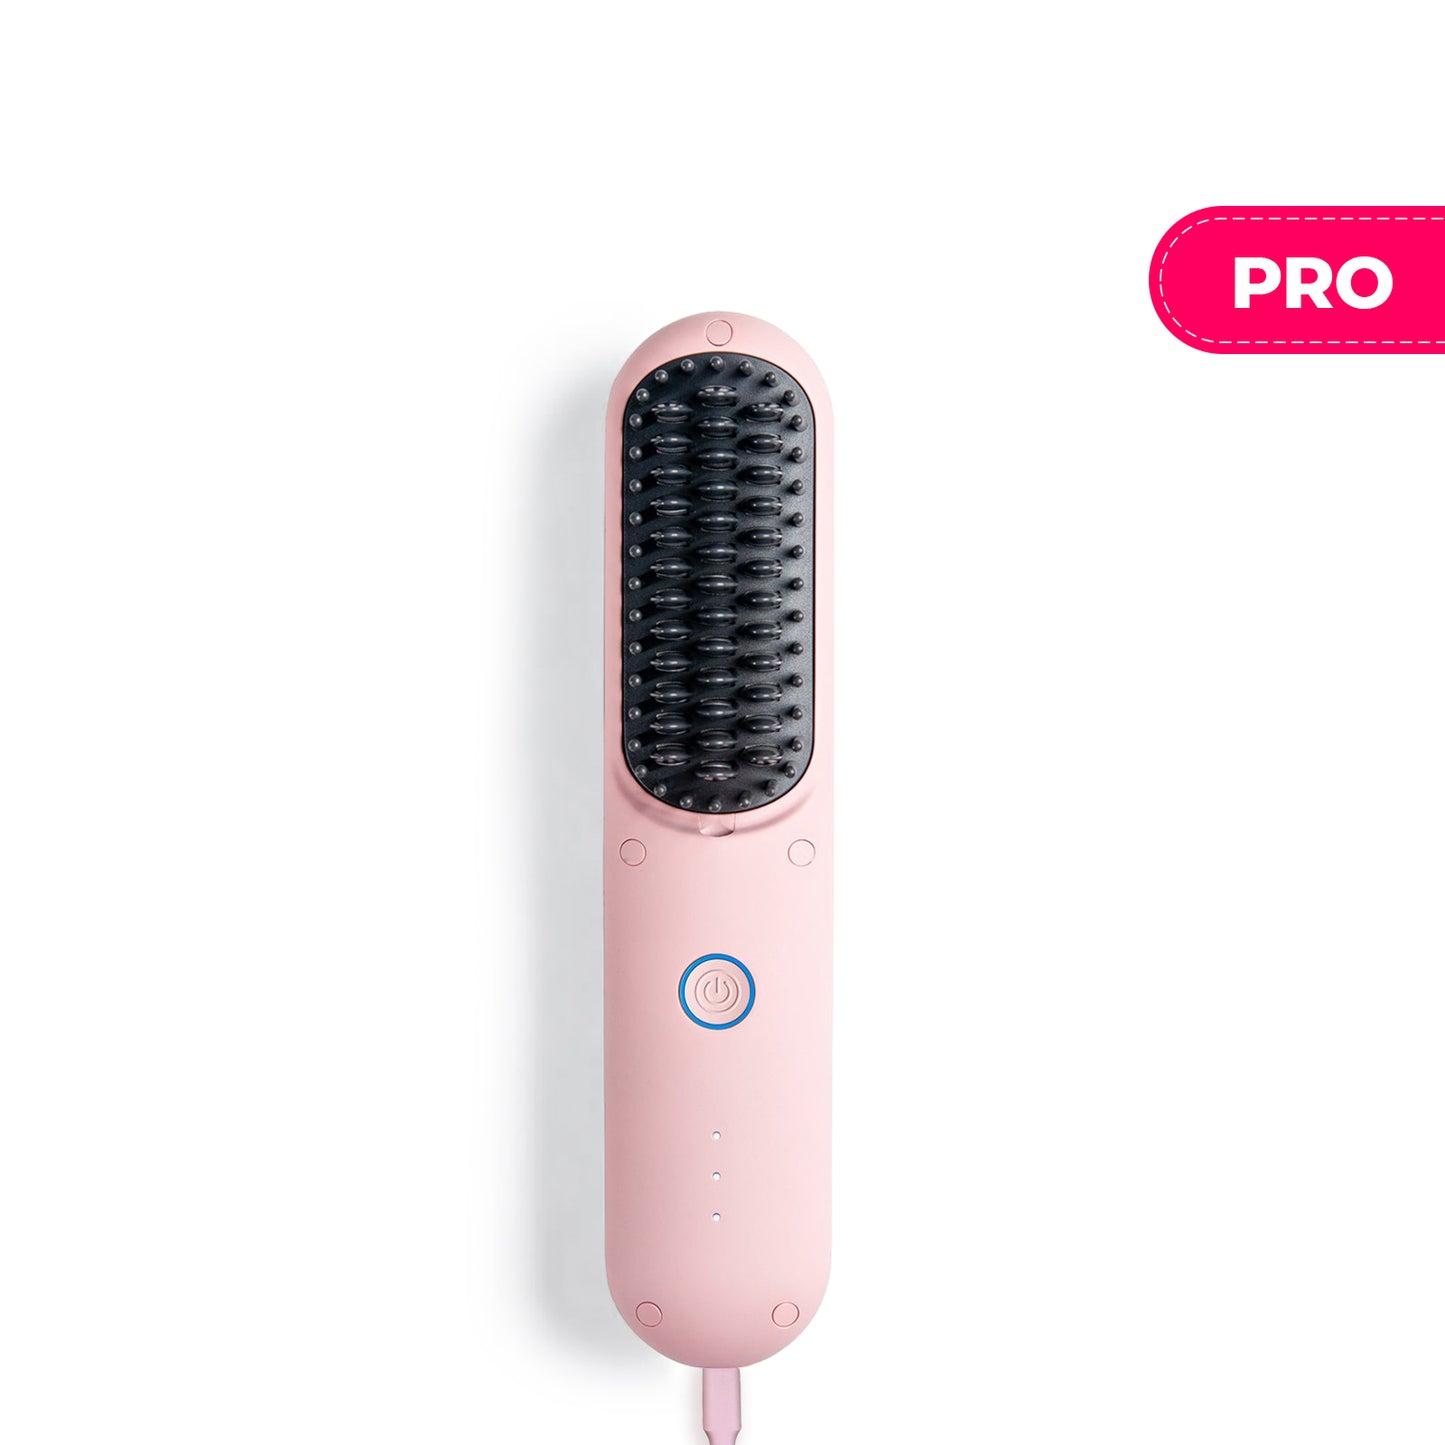 Elegant TYMO PORTA PRO PINK electric hair brush, designed for on-the-go styling with professional results.